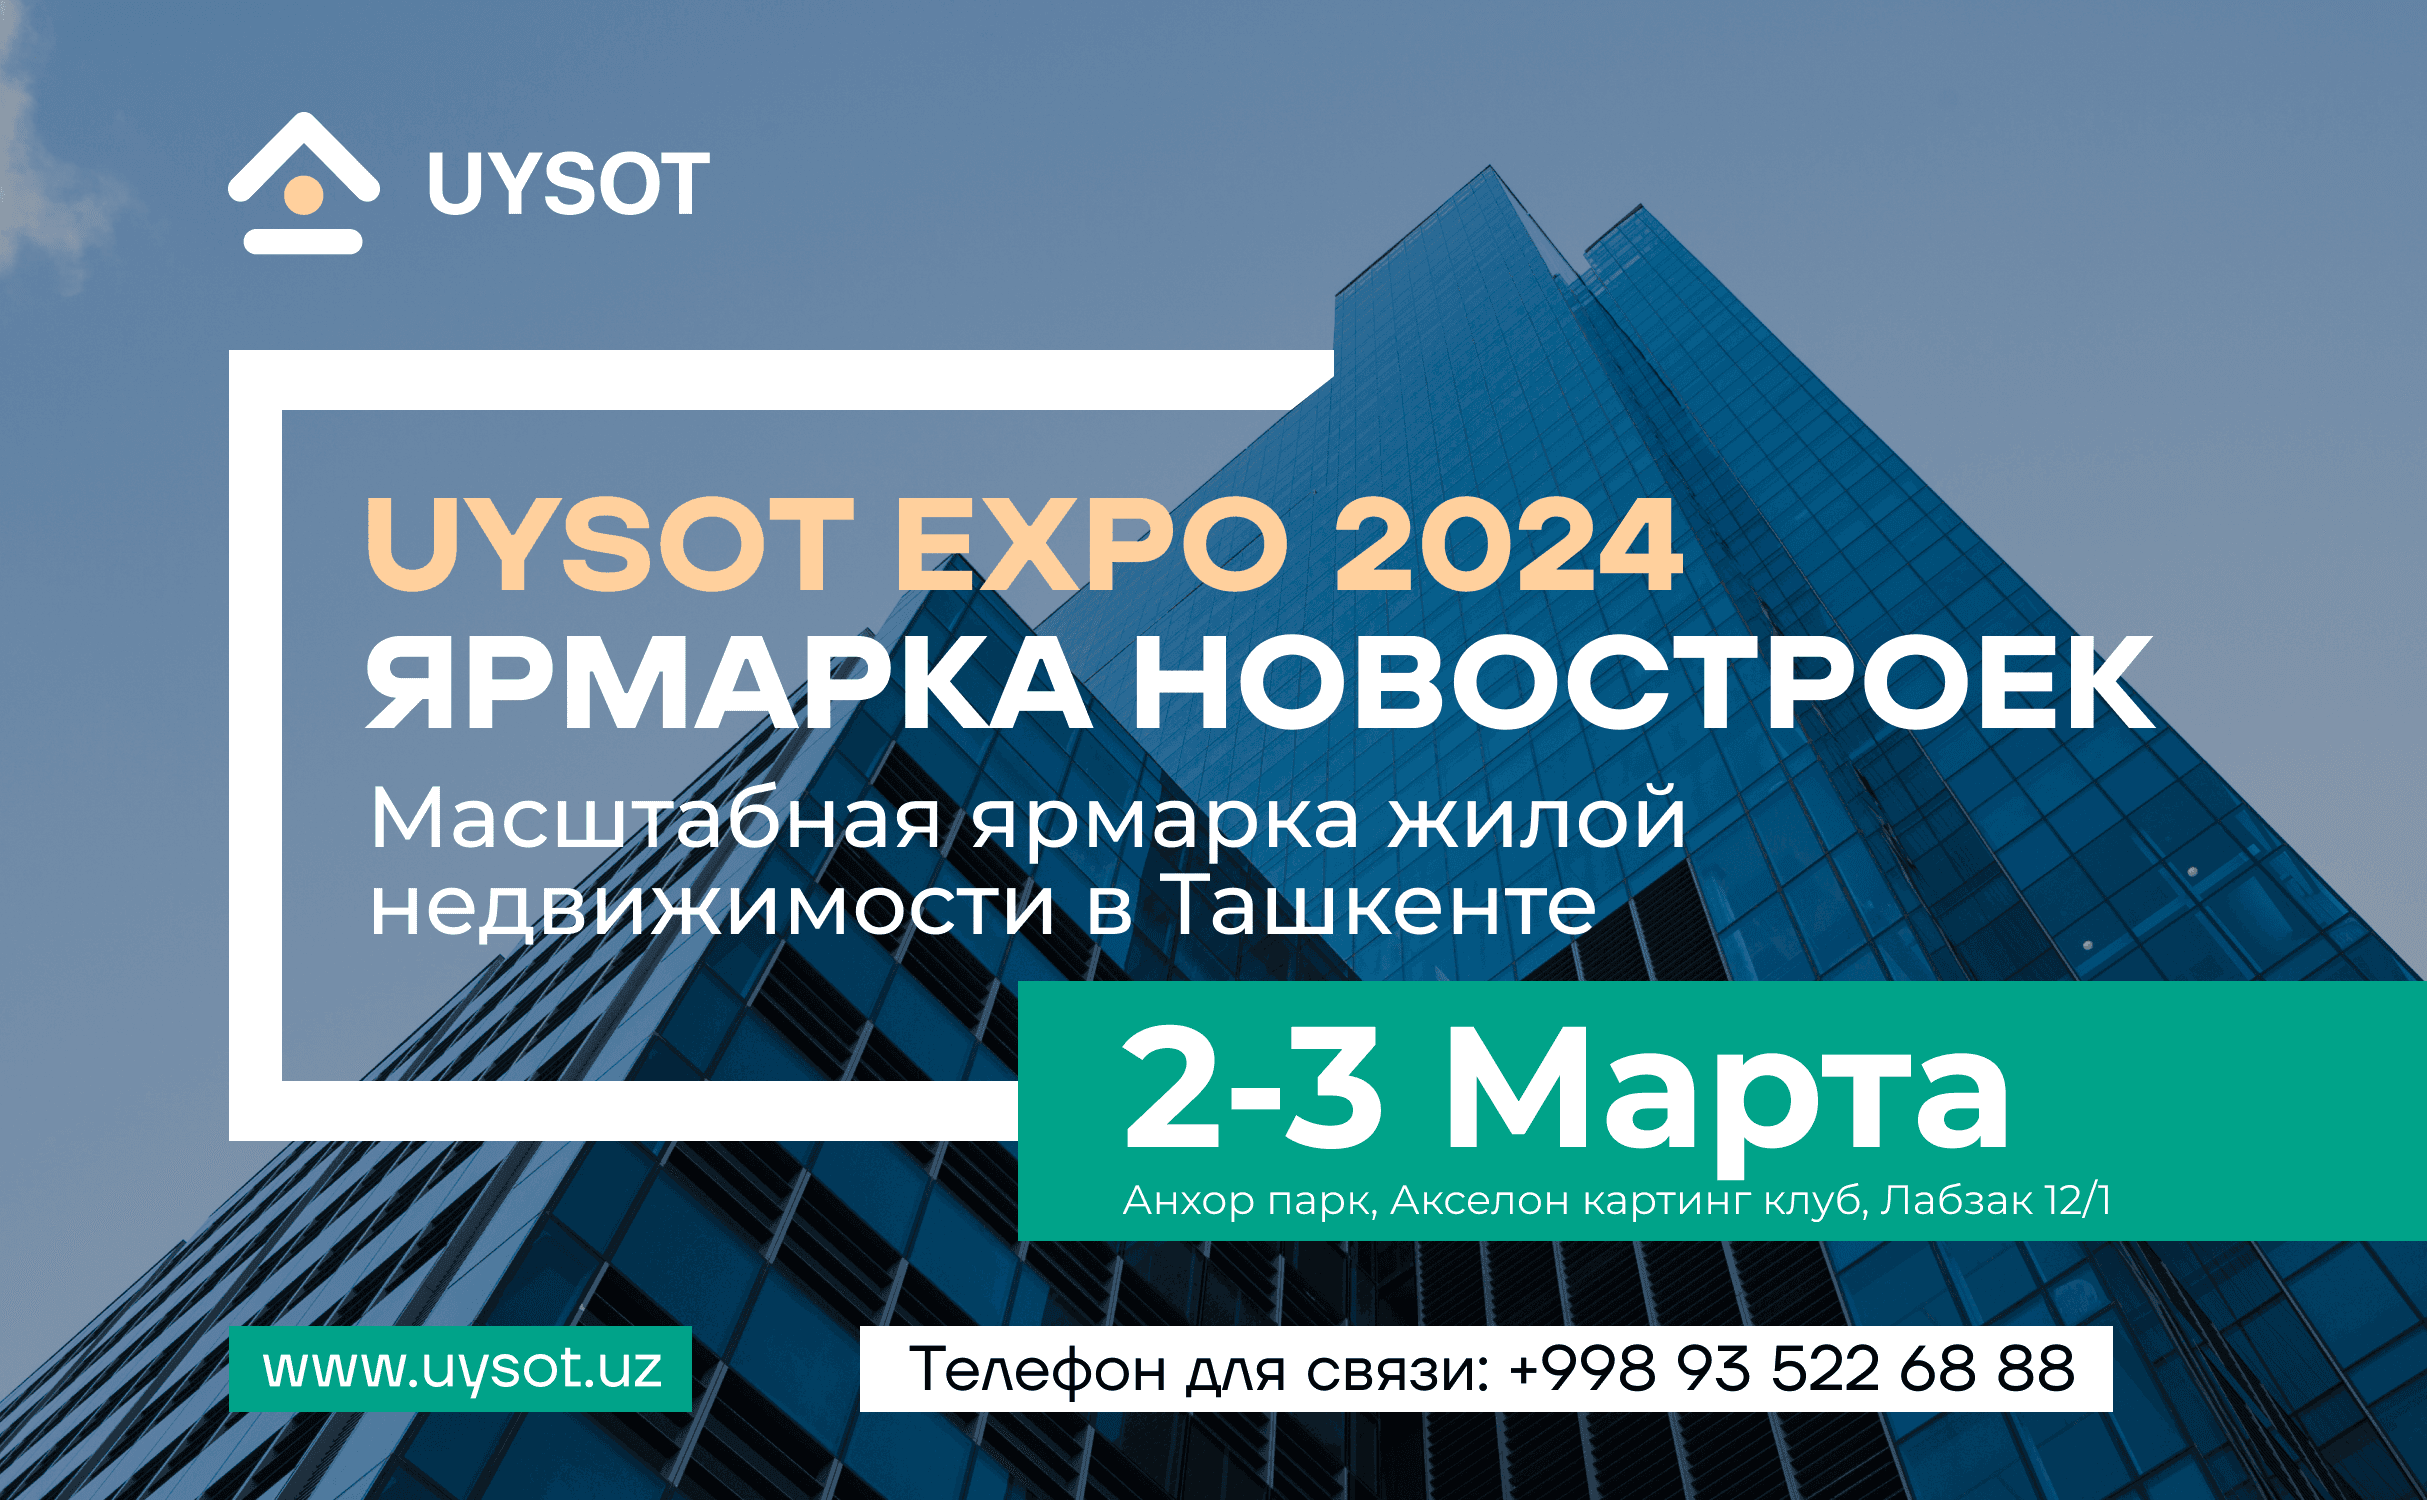 The largest new building fair UYSOT EXPO 2024